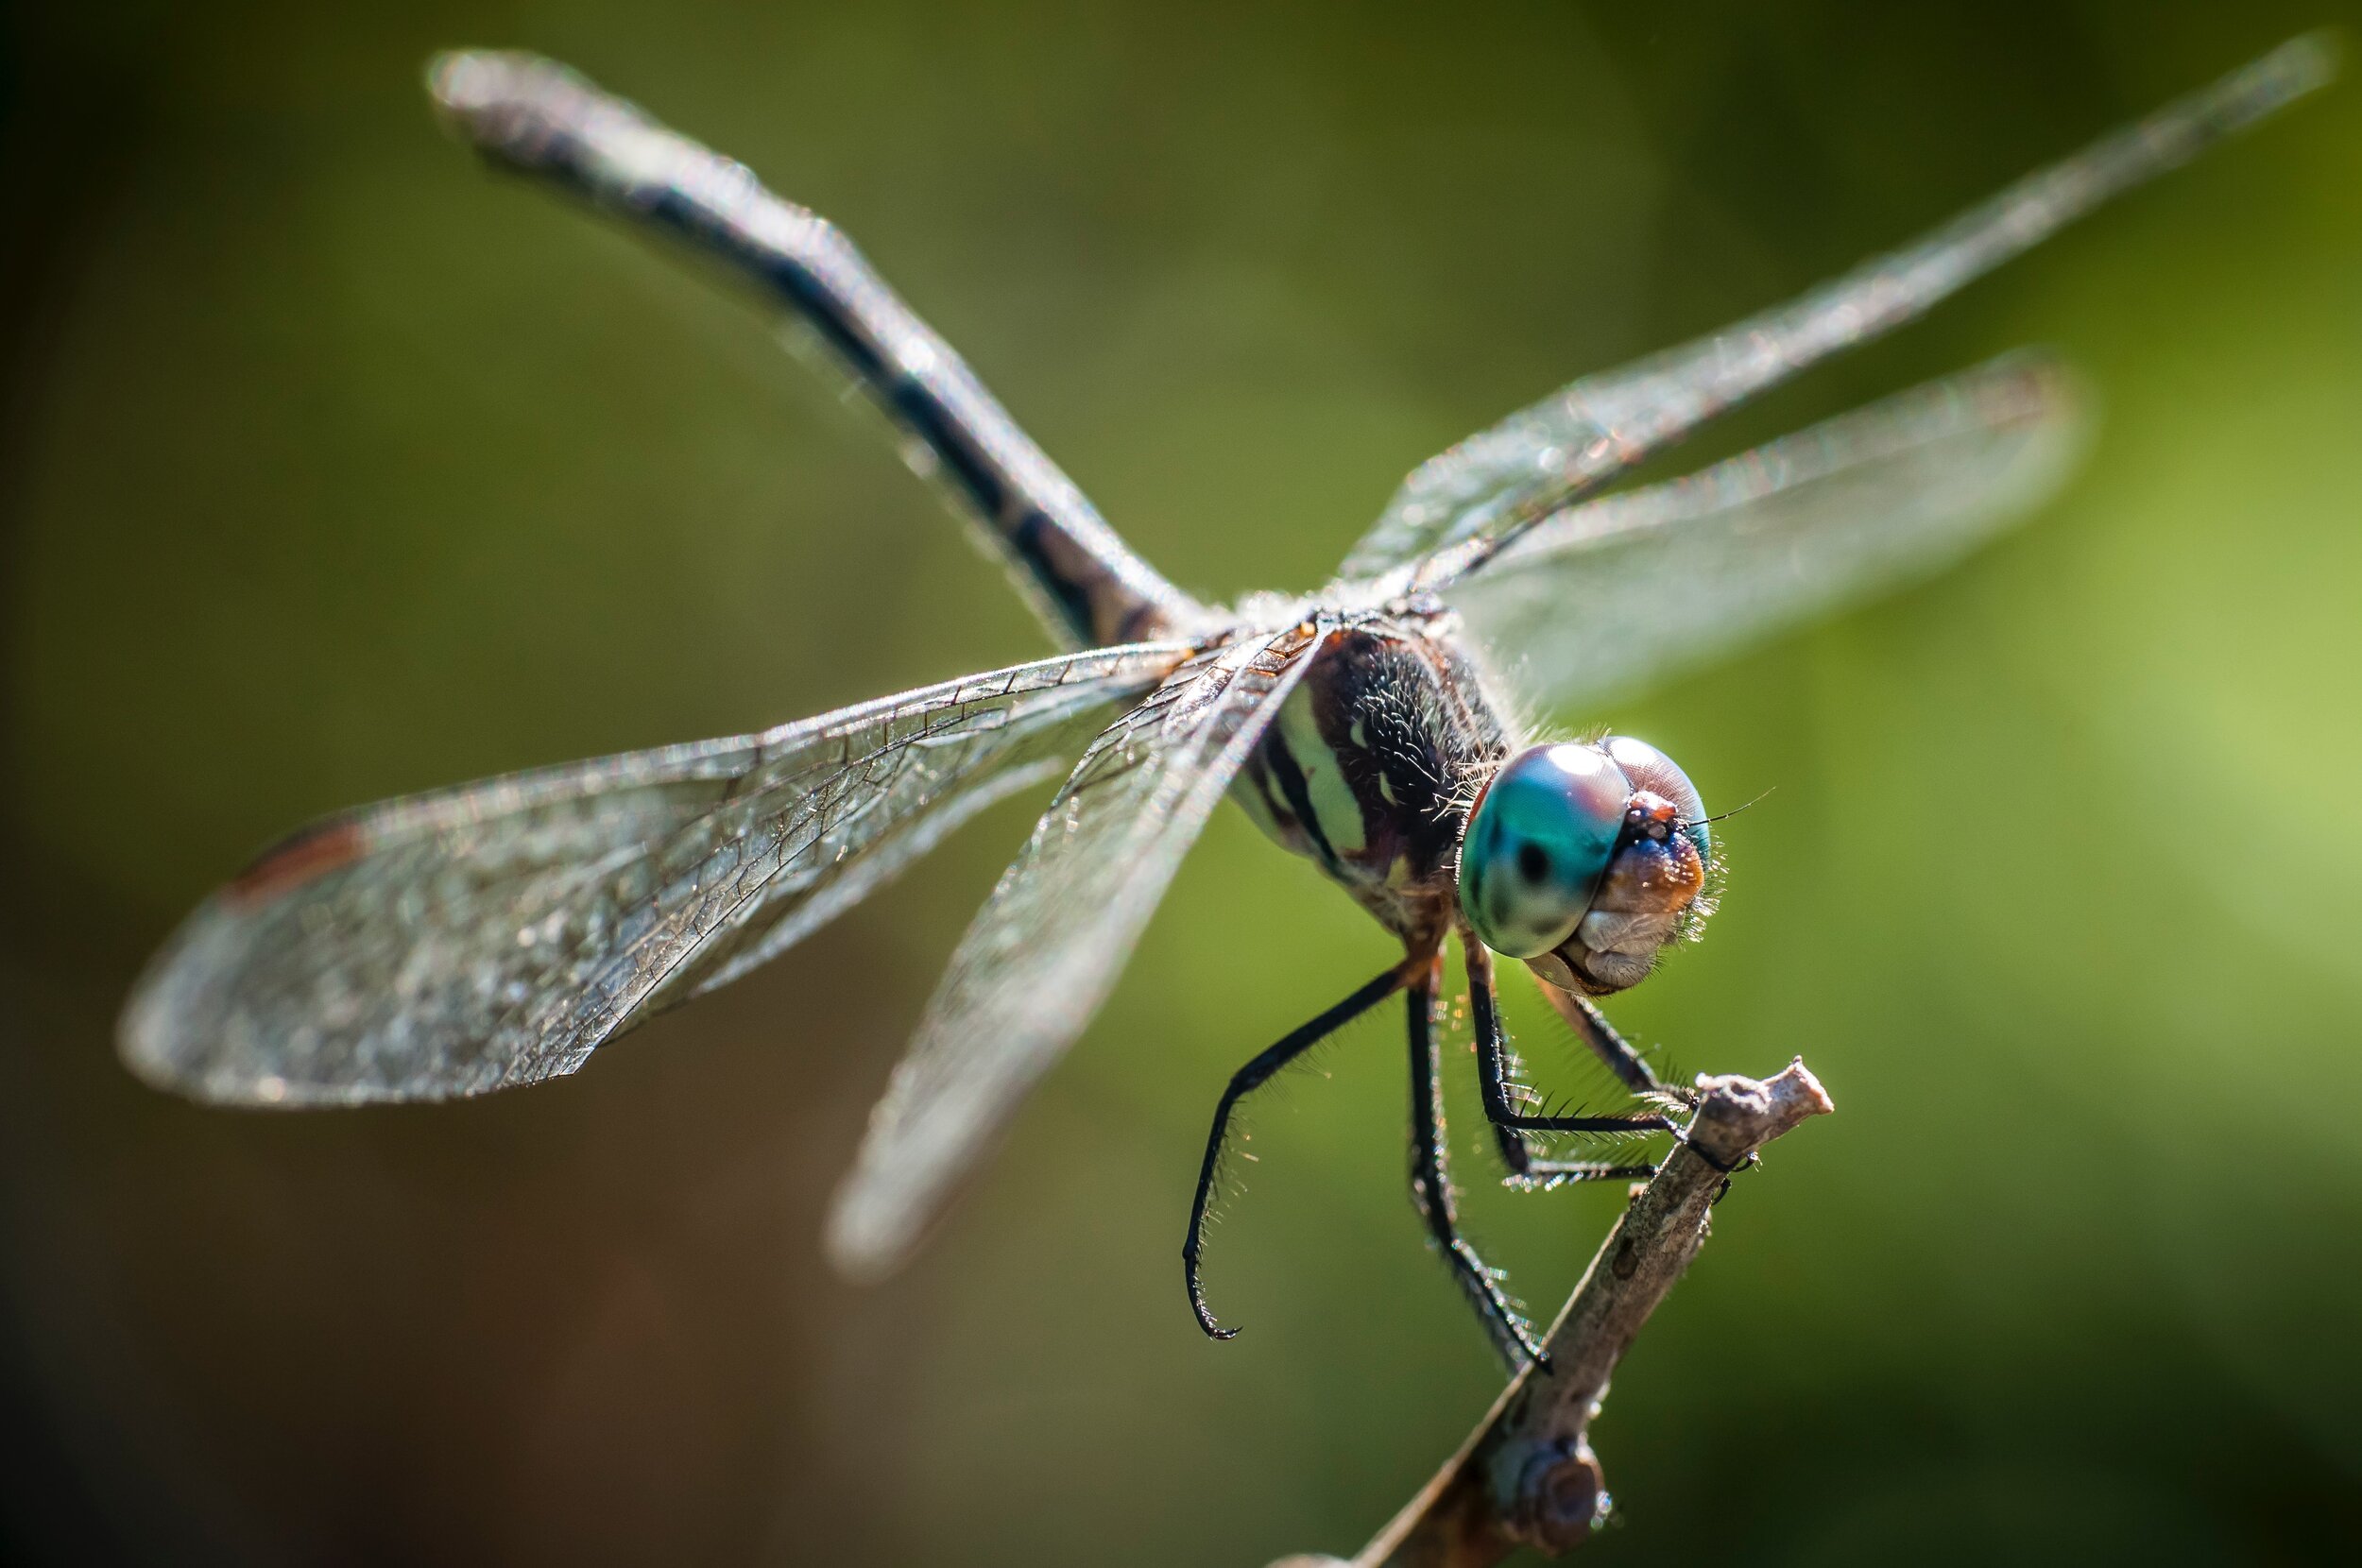  The largest insects to ever live, ancient dragonflies had wingspans of more than 2 feet! They still dominate the skies now, albeit in a smaller package, as the most advanced fliers in the animal world! 